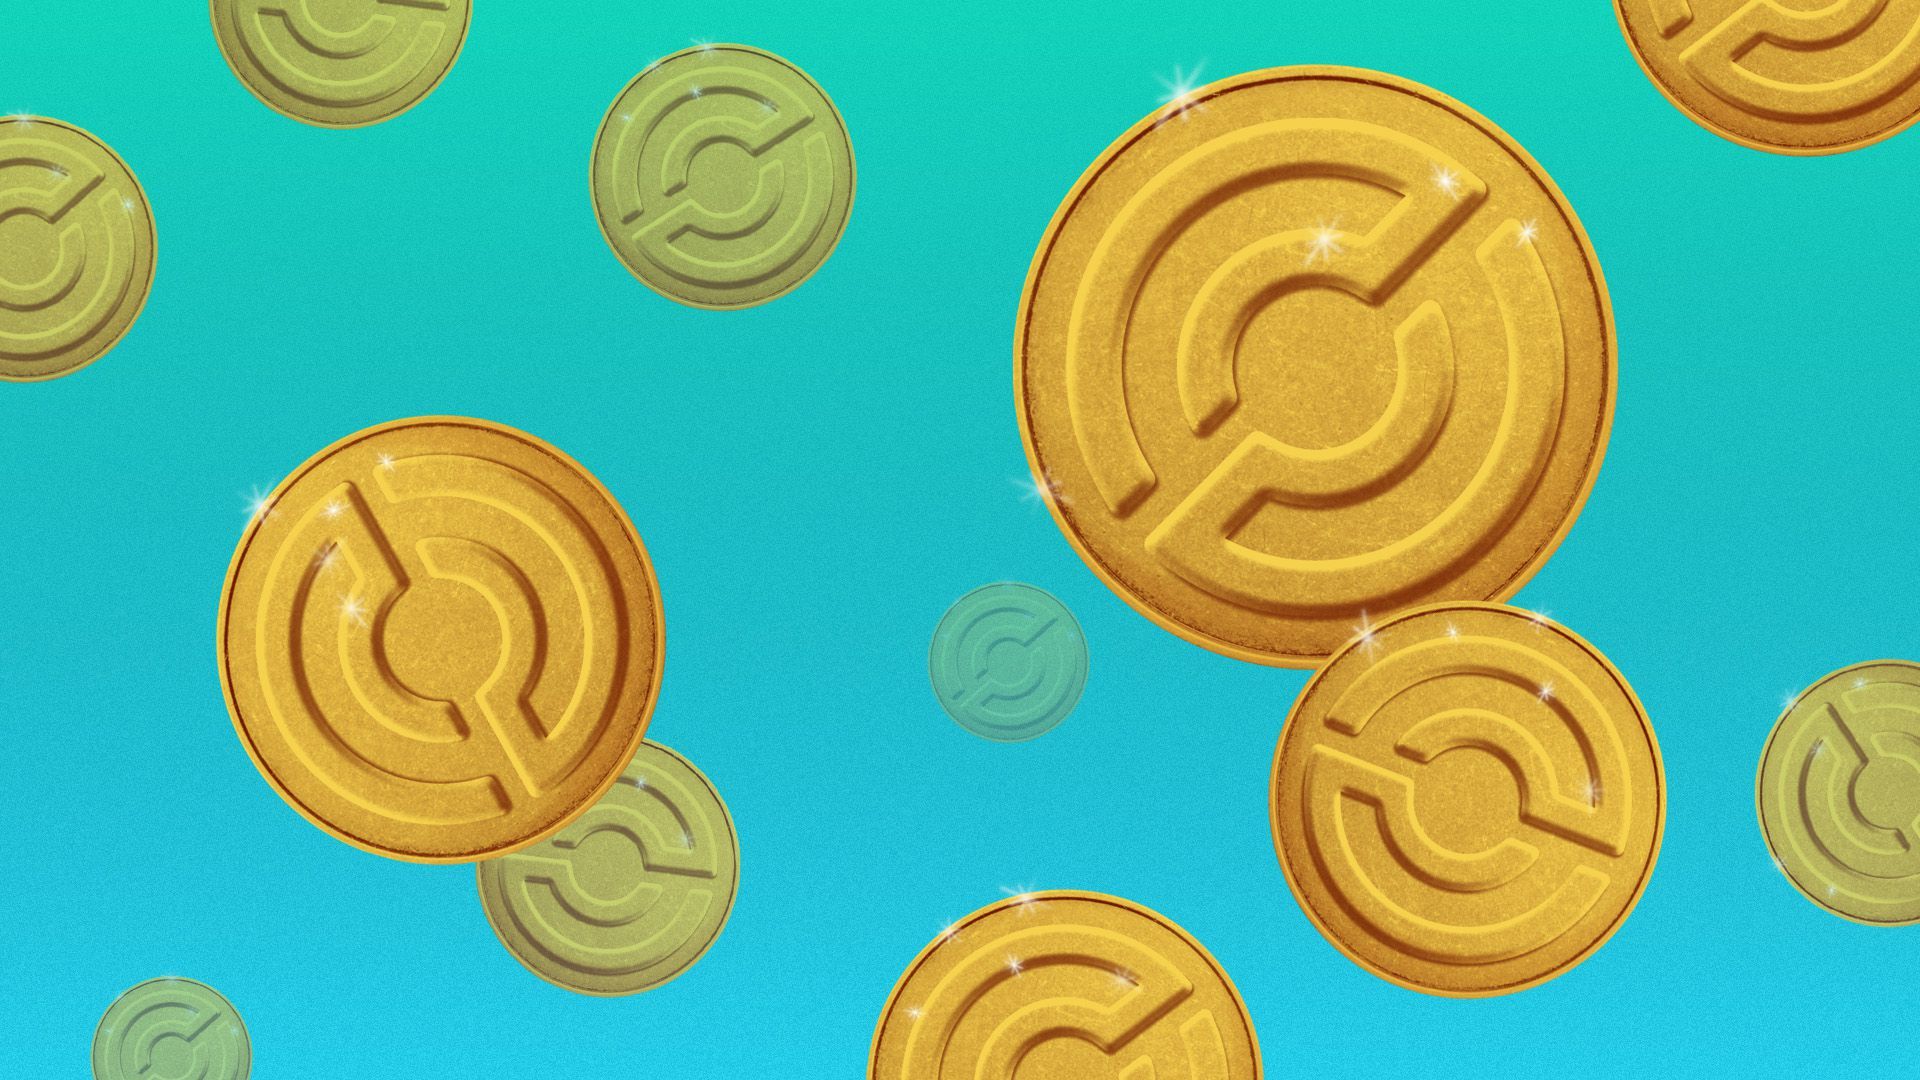 Illustration of golden coins with the Coinbase logo on them